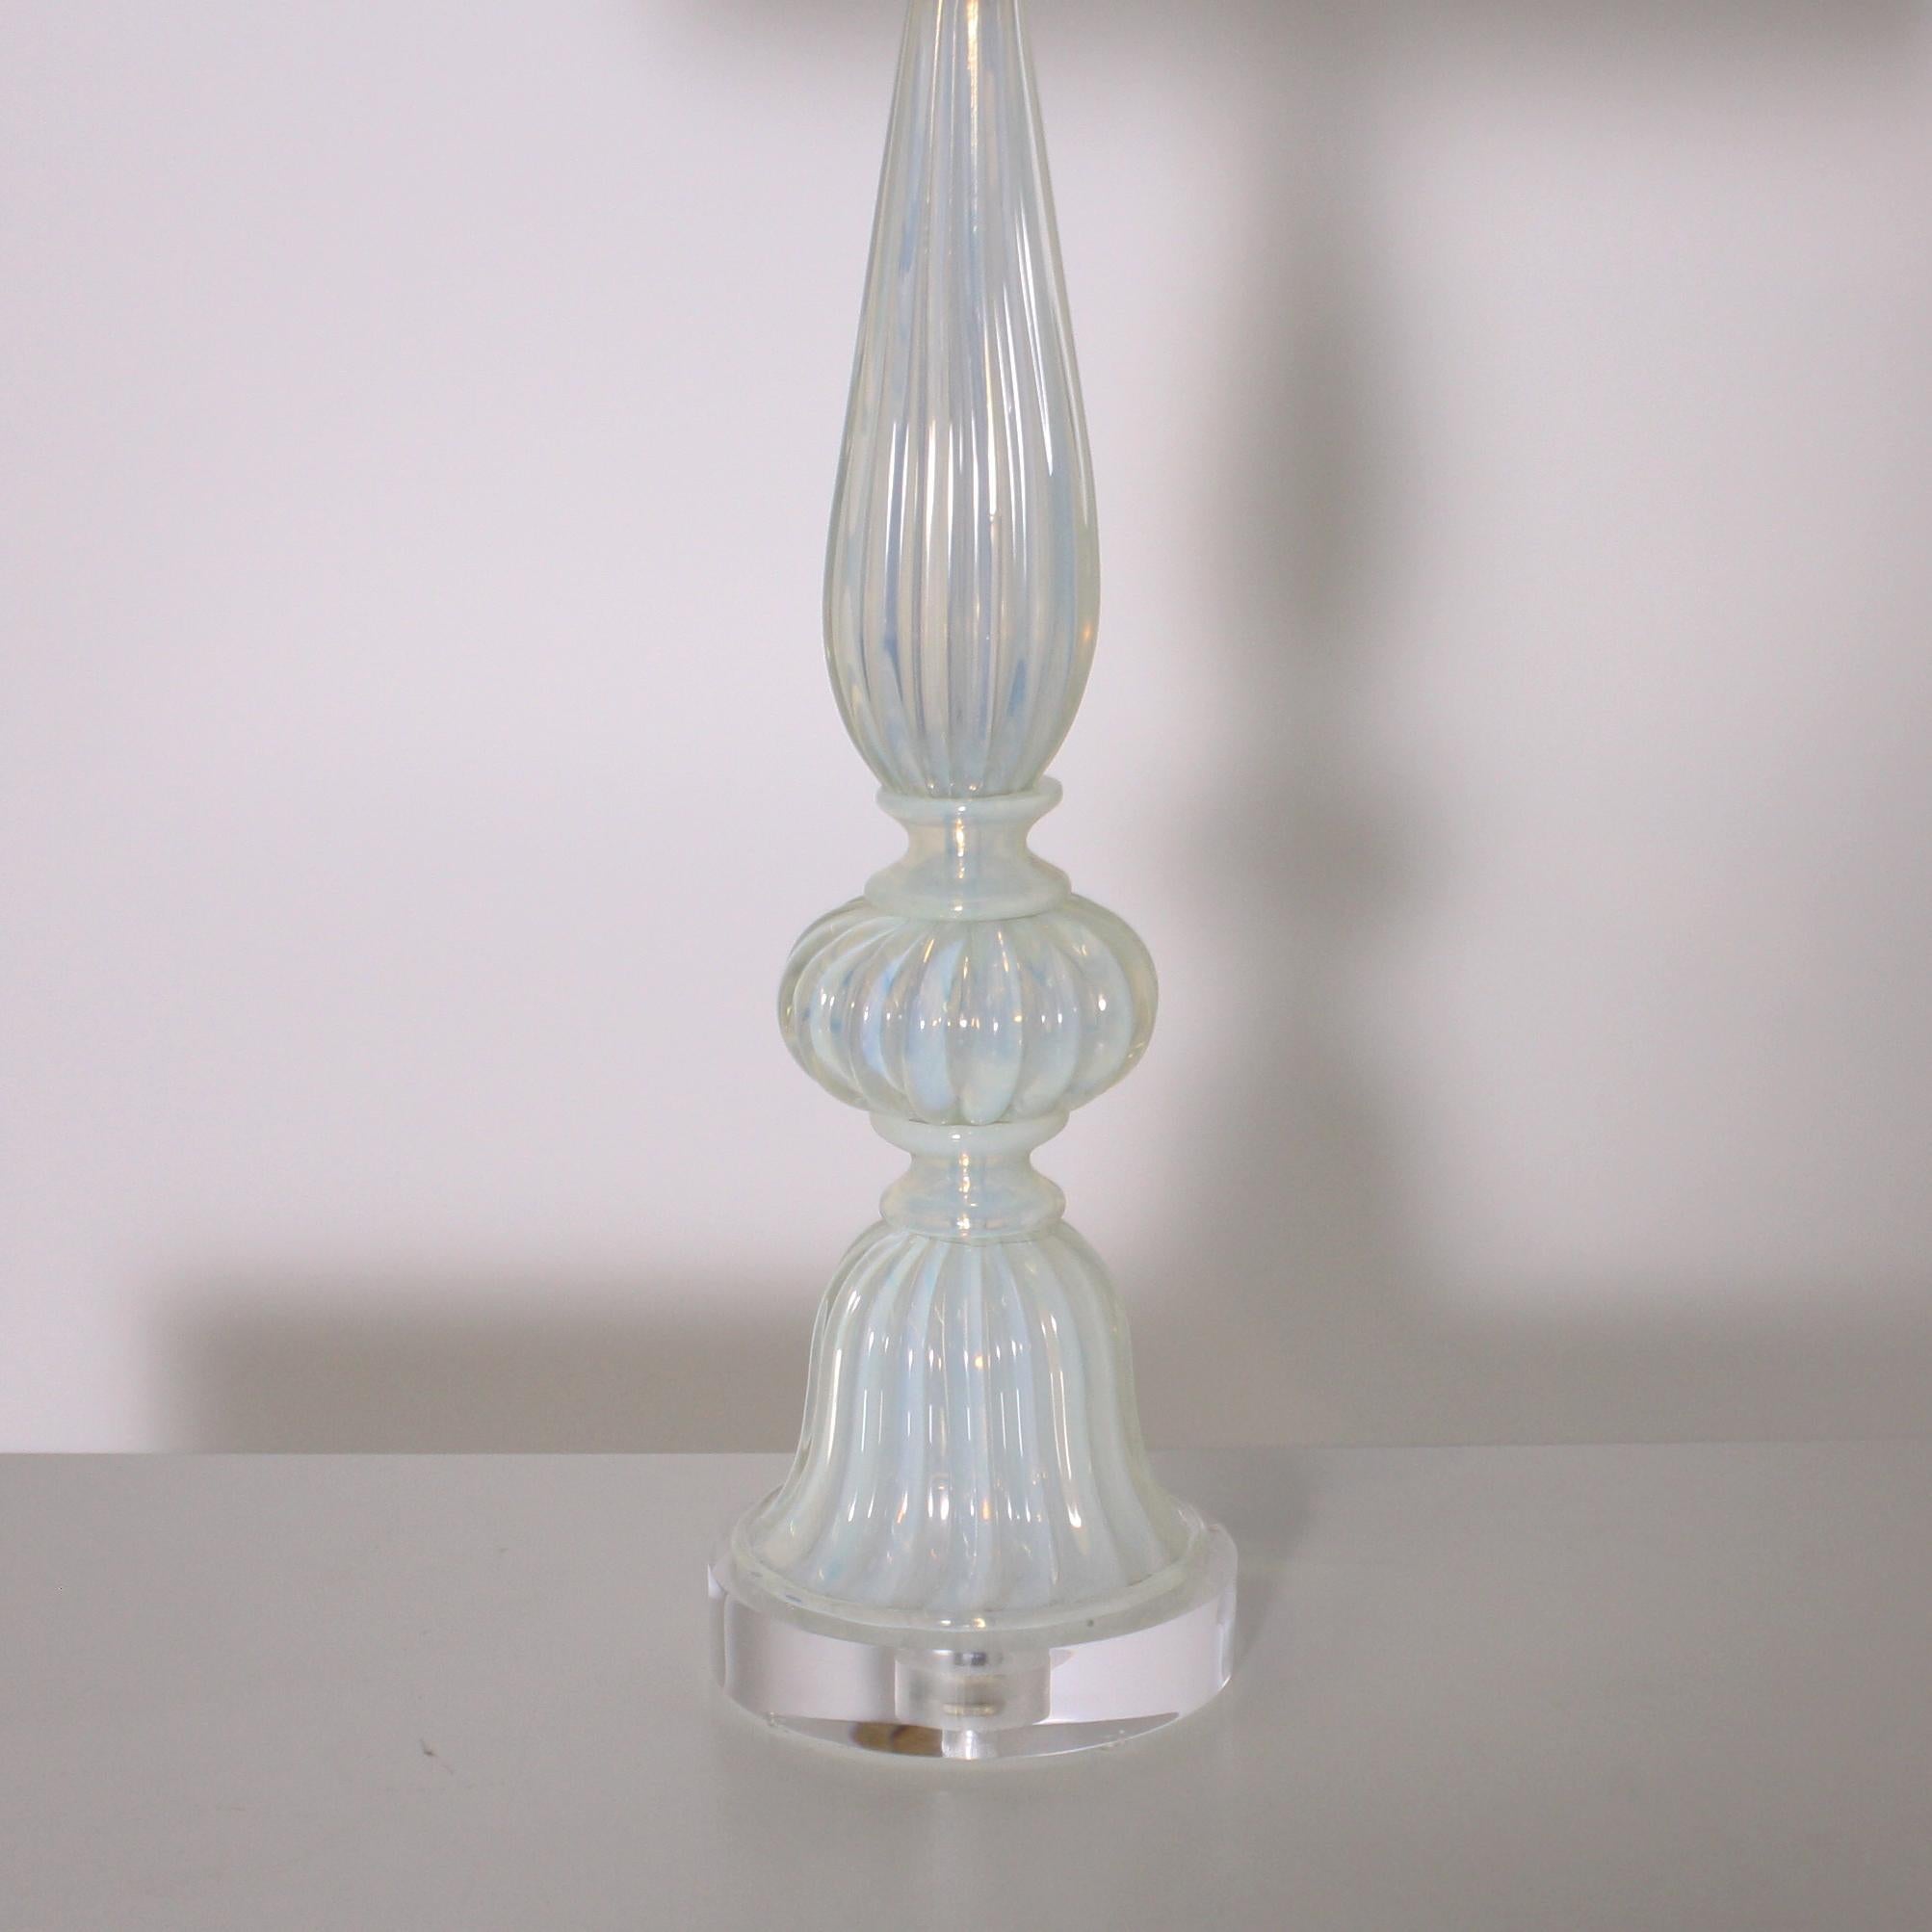 Pair of opaline Murano lamps, circa 1960

Custom linen shade, crystal ball finial, Lucite base, gold twisted cording.